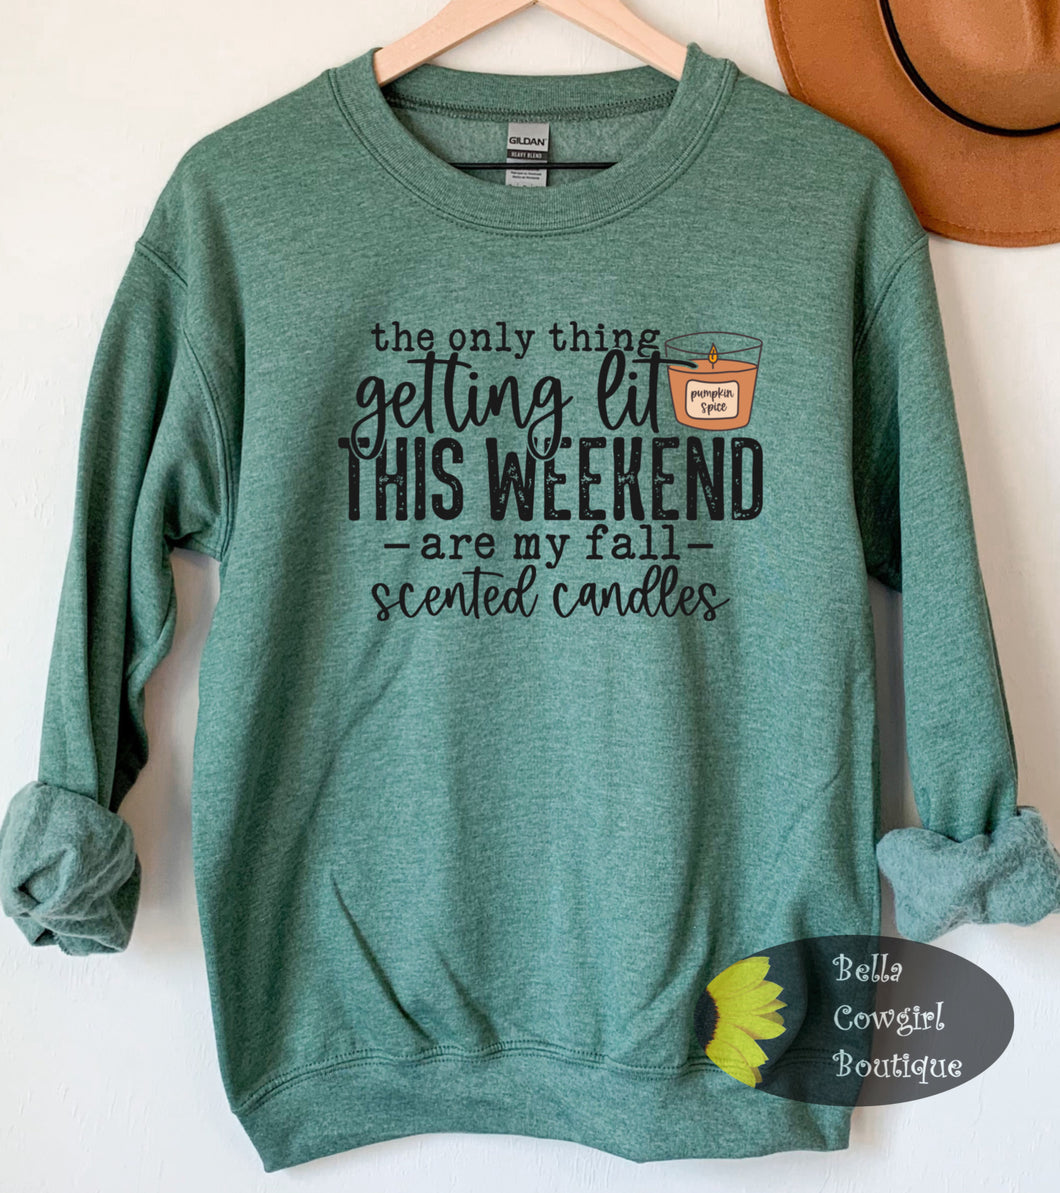 The Only Thing Getting Lit This Weekend Are My Fall Candles Funny Pumpkin Spice Autumn Sweatshirt